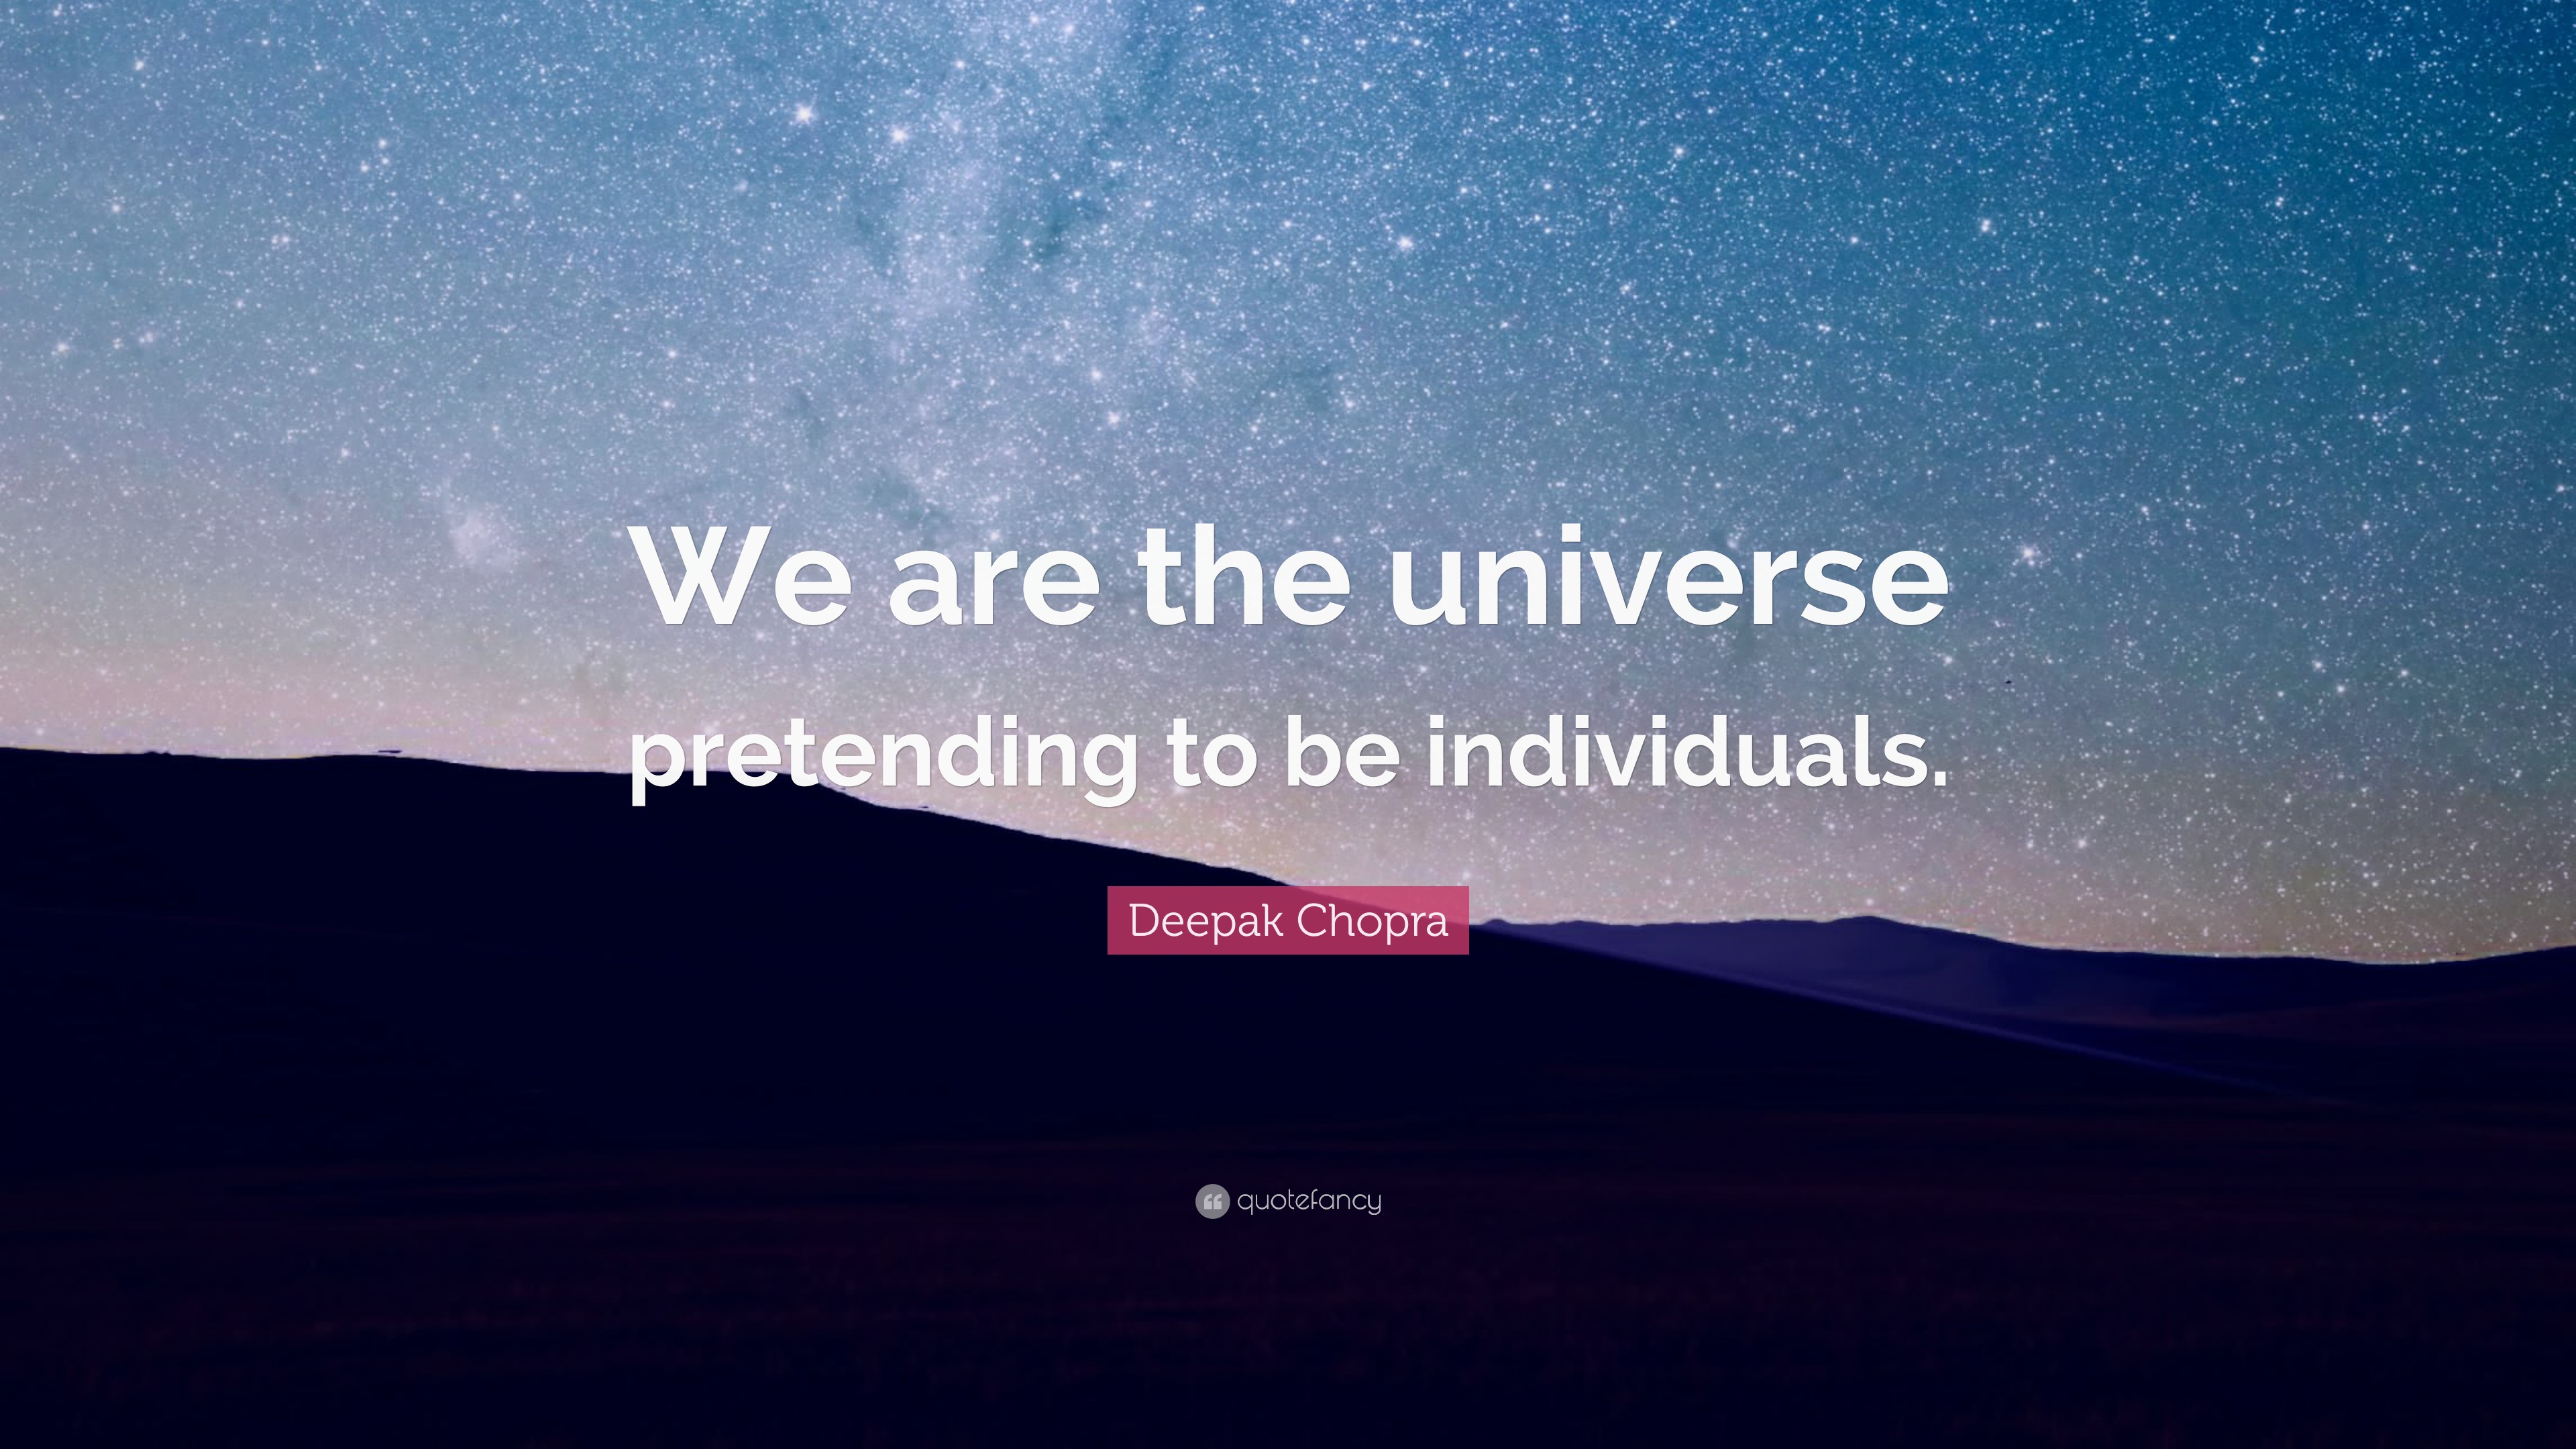 Deepak Chopra Quote: “We are the universe pretending to be individuals.”